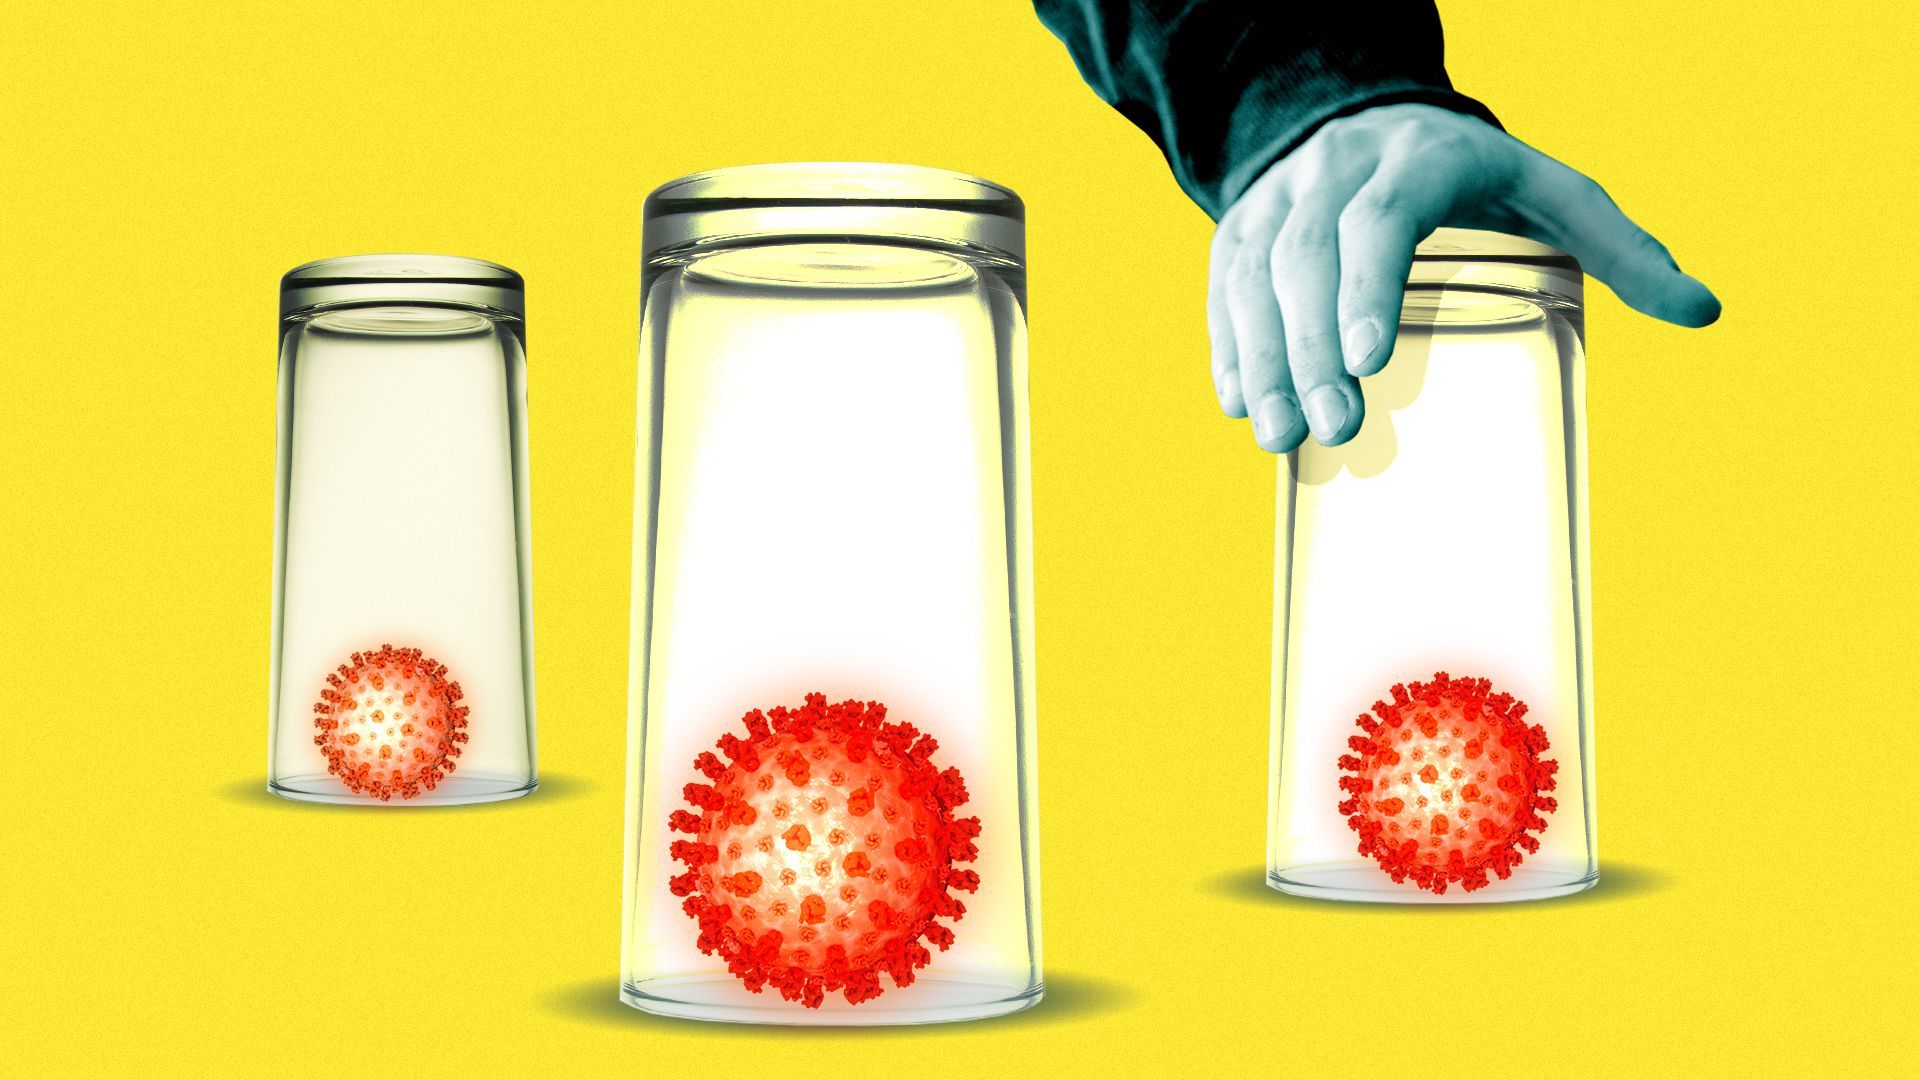 Illustration of a hand placing cups over viruses